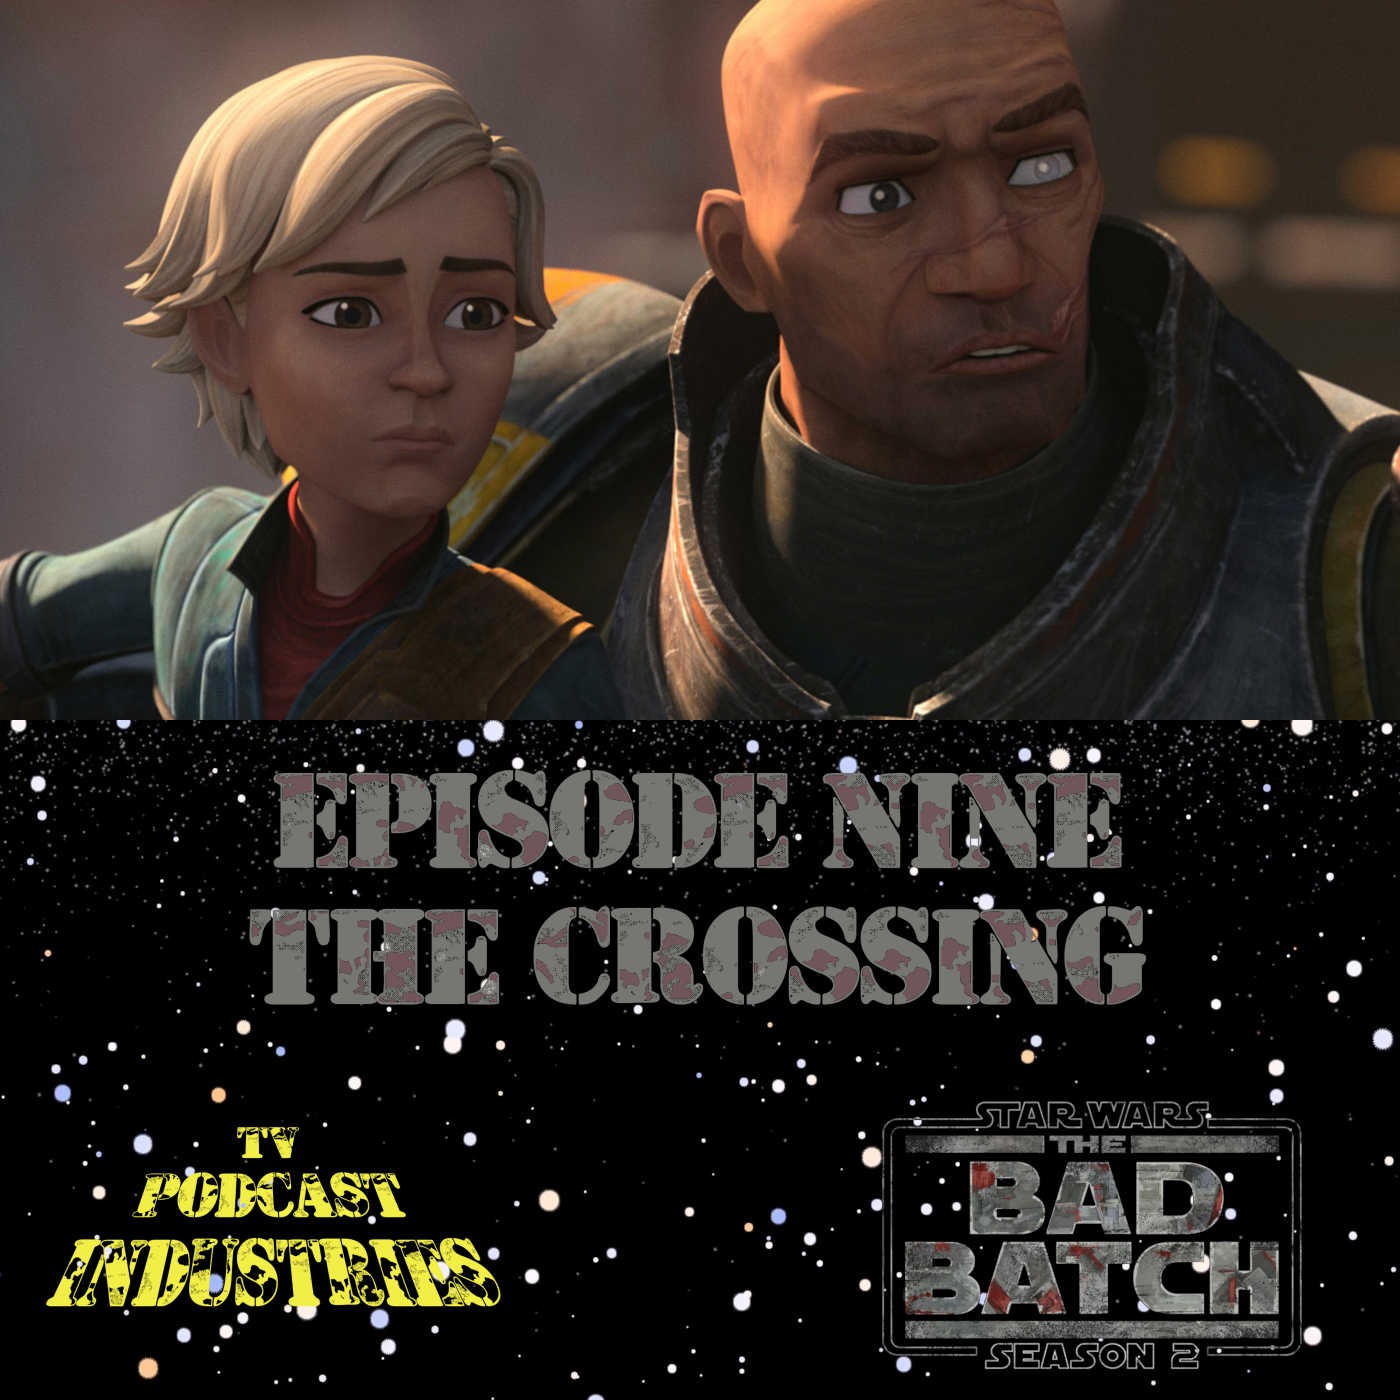 Star Wars The Bad Batch 209 Podcast "The Crossing"